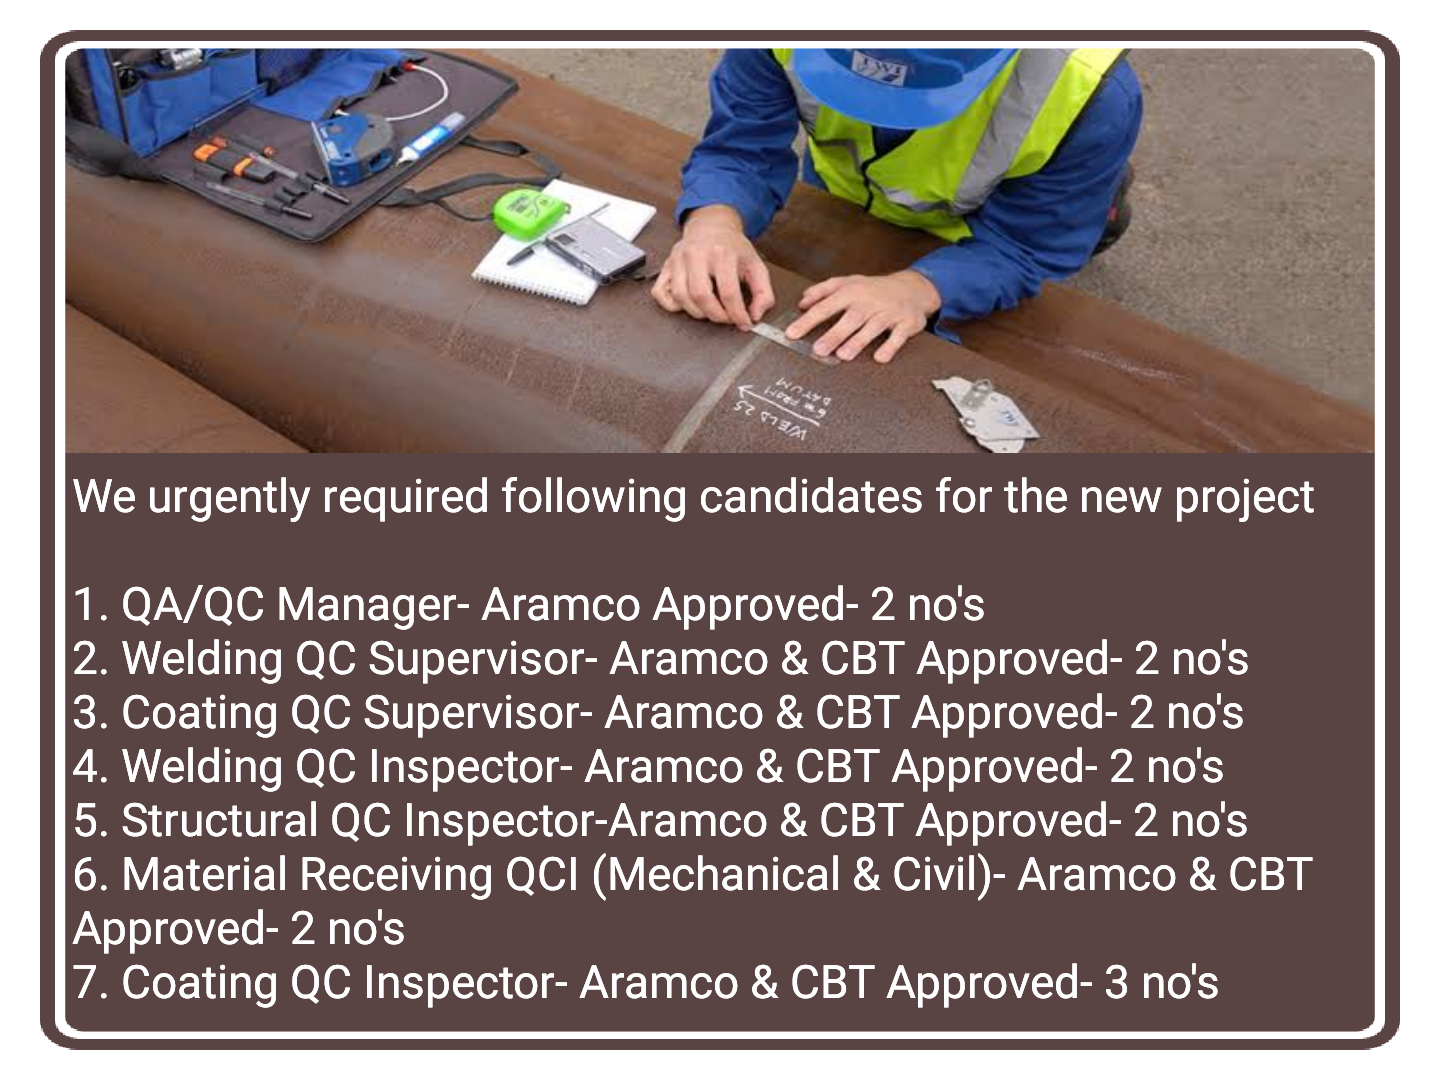 Welding, Coating, Structural, Material Mechanical & Civil QC Inspector Jobs